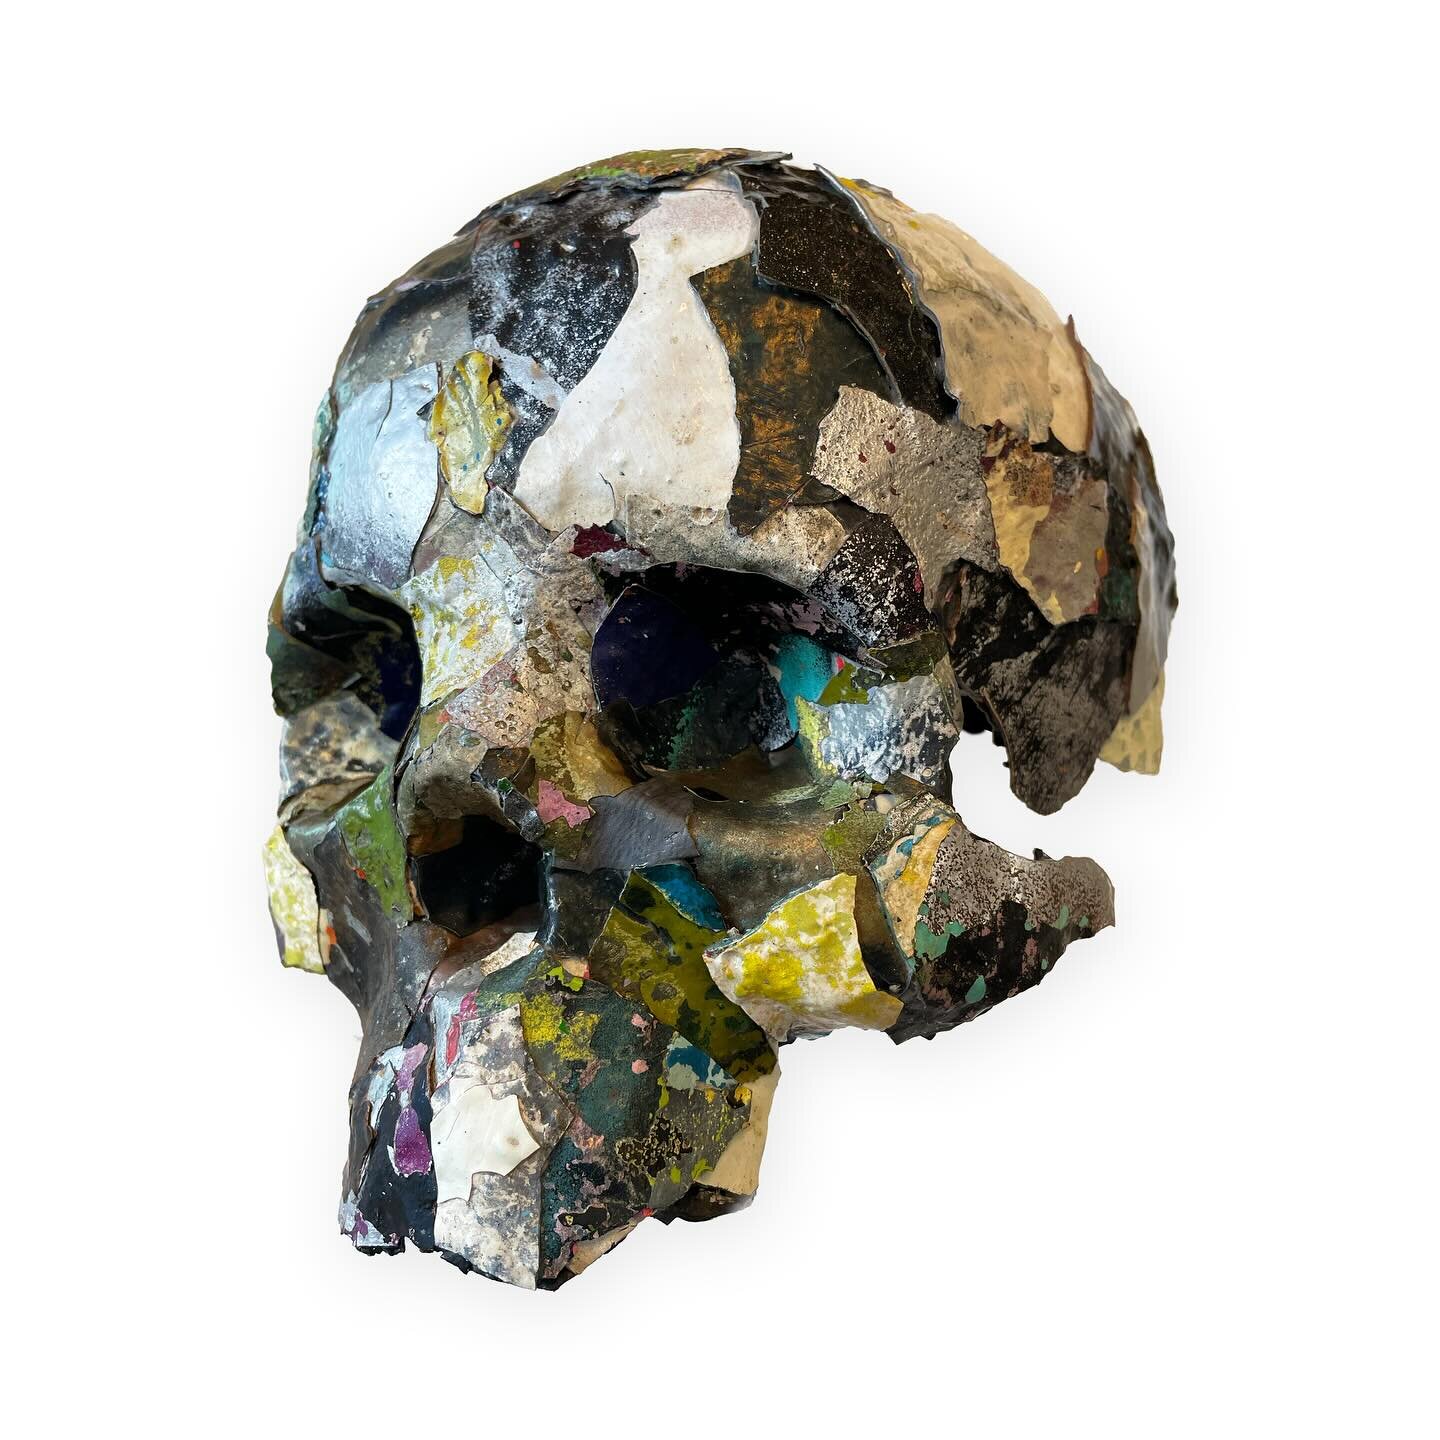 Skull VII is a skull sculpture 125% of lifesize. This one is made from graffiti paint chips found in the area around the @straatmuseum in the north of Amsterdam. A vibrant area with a lot of graffiti streetart going on. It&rsquo;s changing every day.